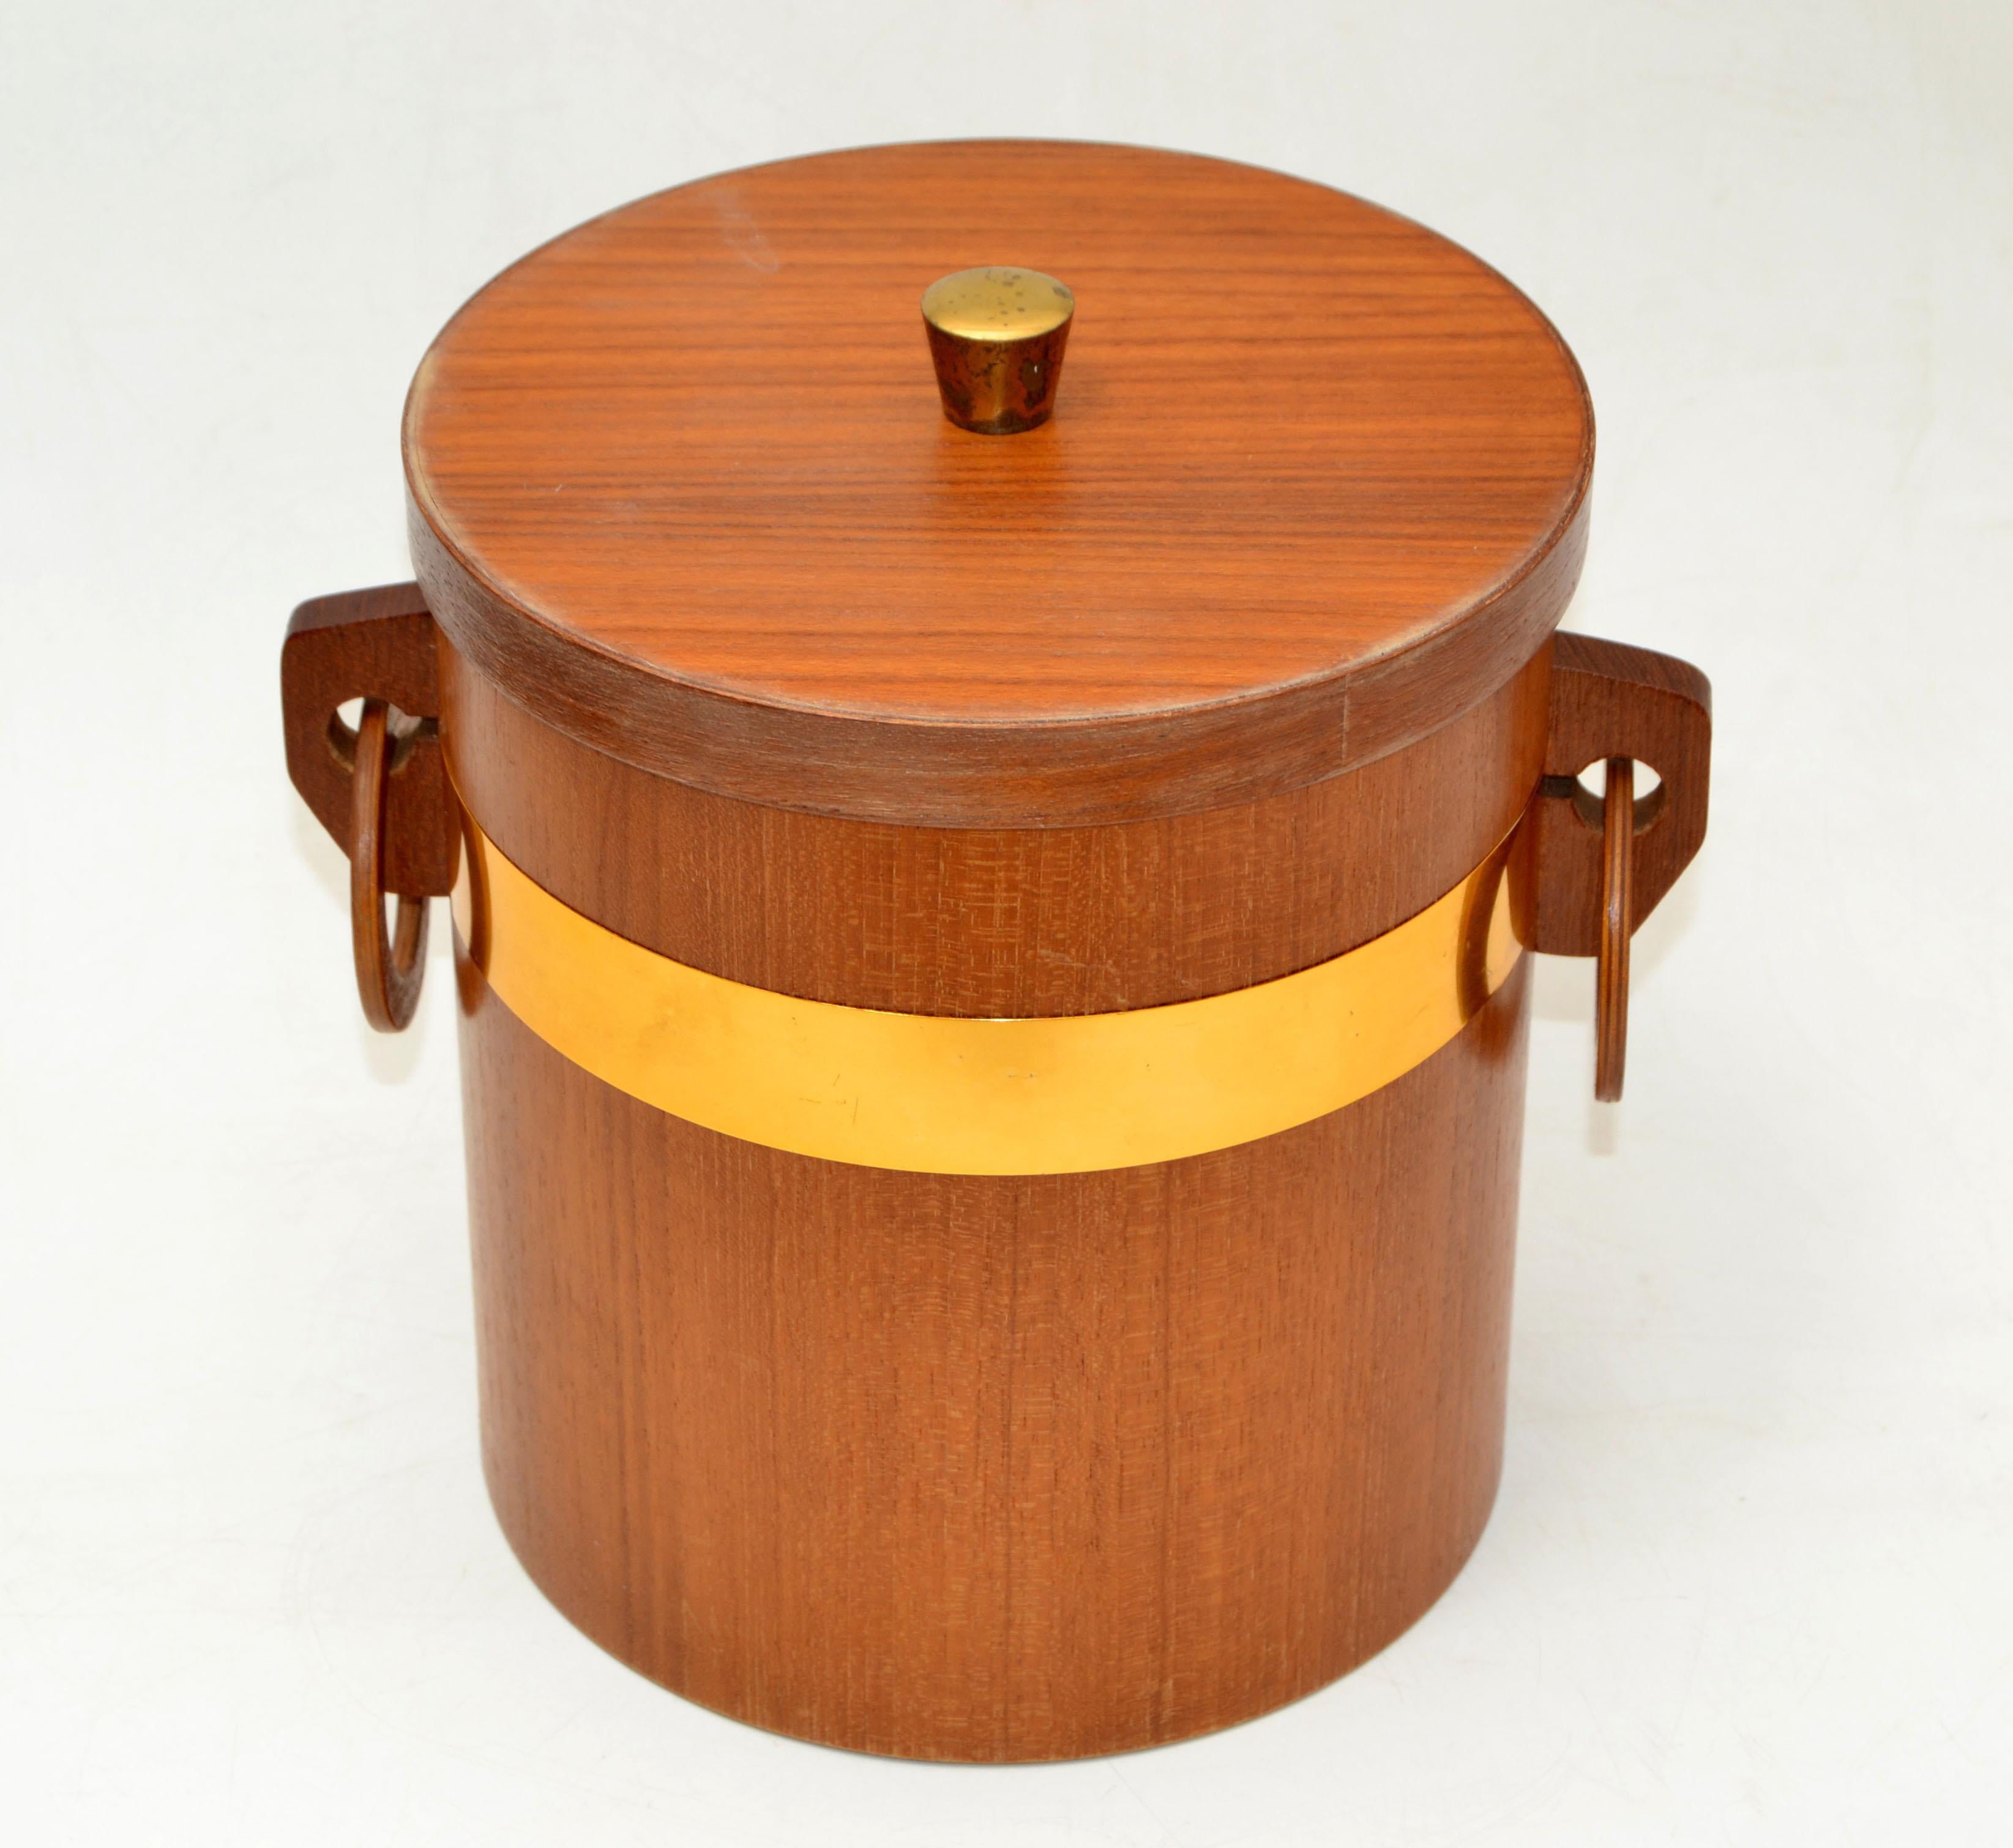 Danish modern two-tone teak lidded ice bucket with Brass Knob. 
The interior is lined with white plastic.
In good vintage condition. The Teak Wood has dried out over the many years and could use some teak oil. Brass Knob has patina.